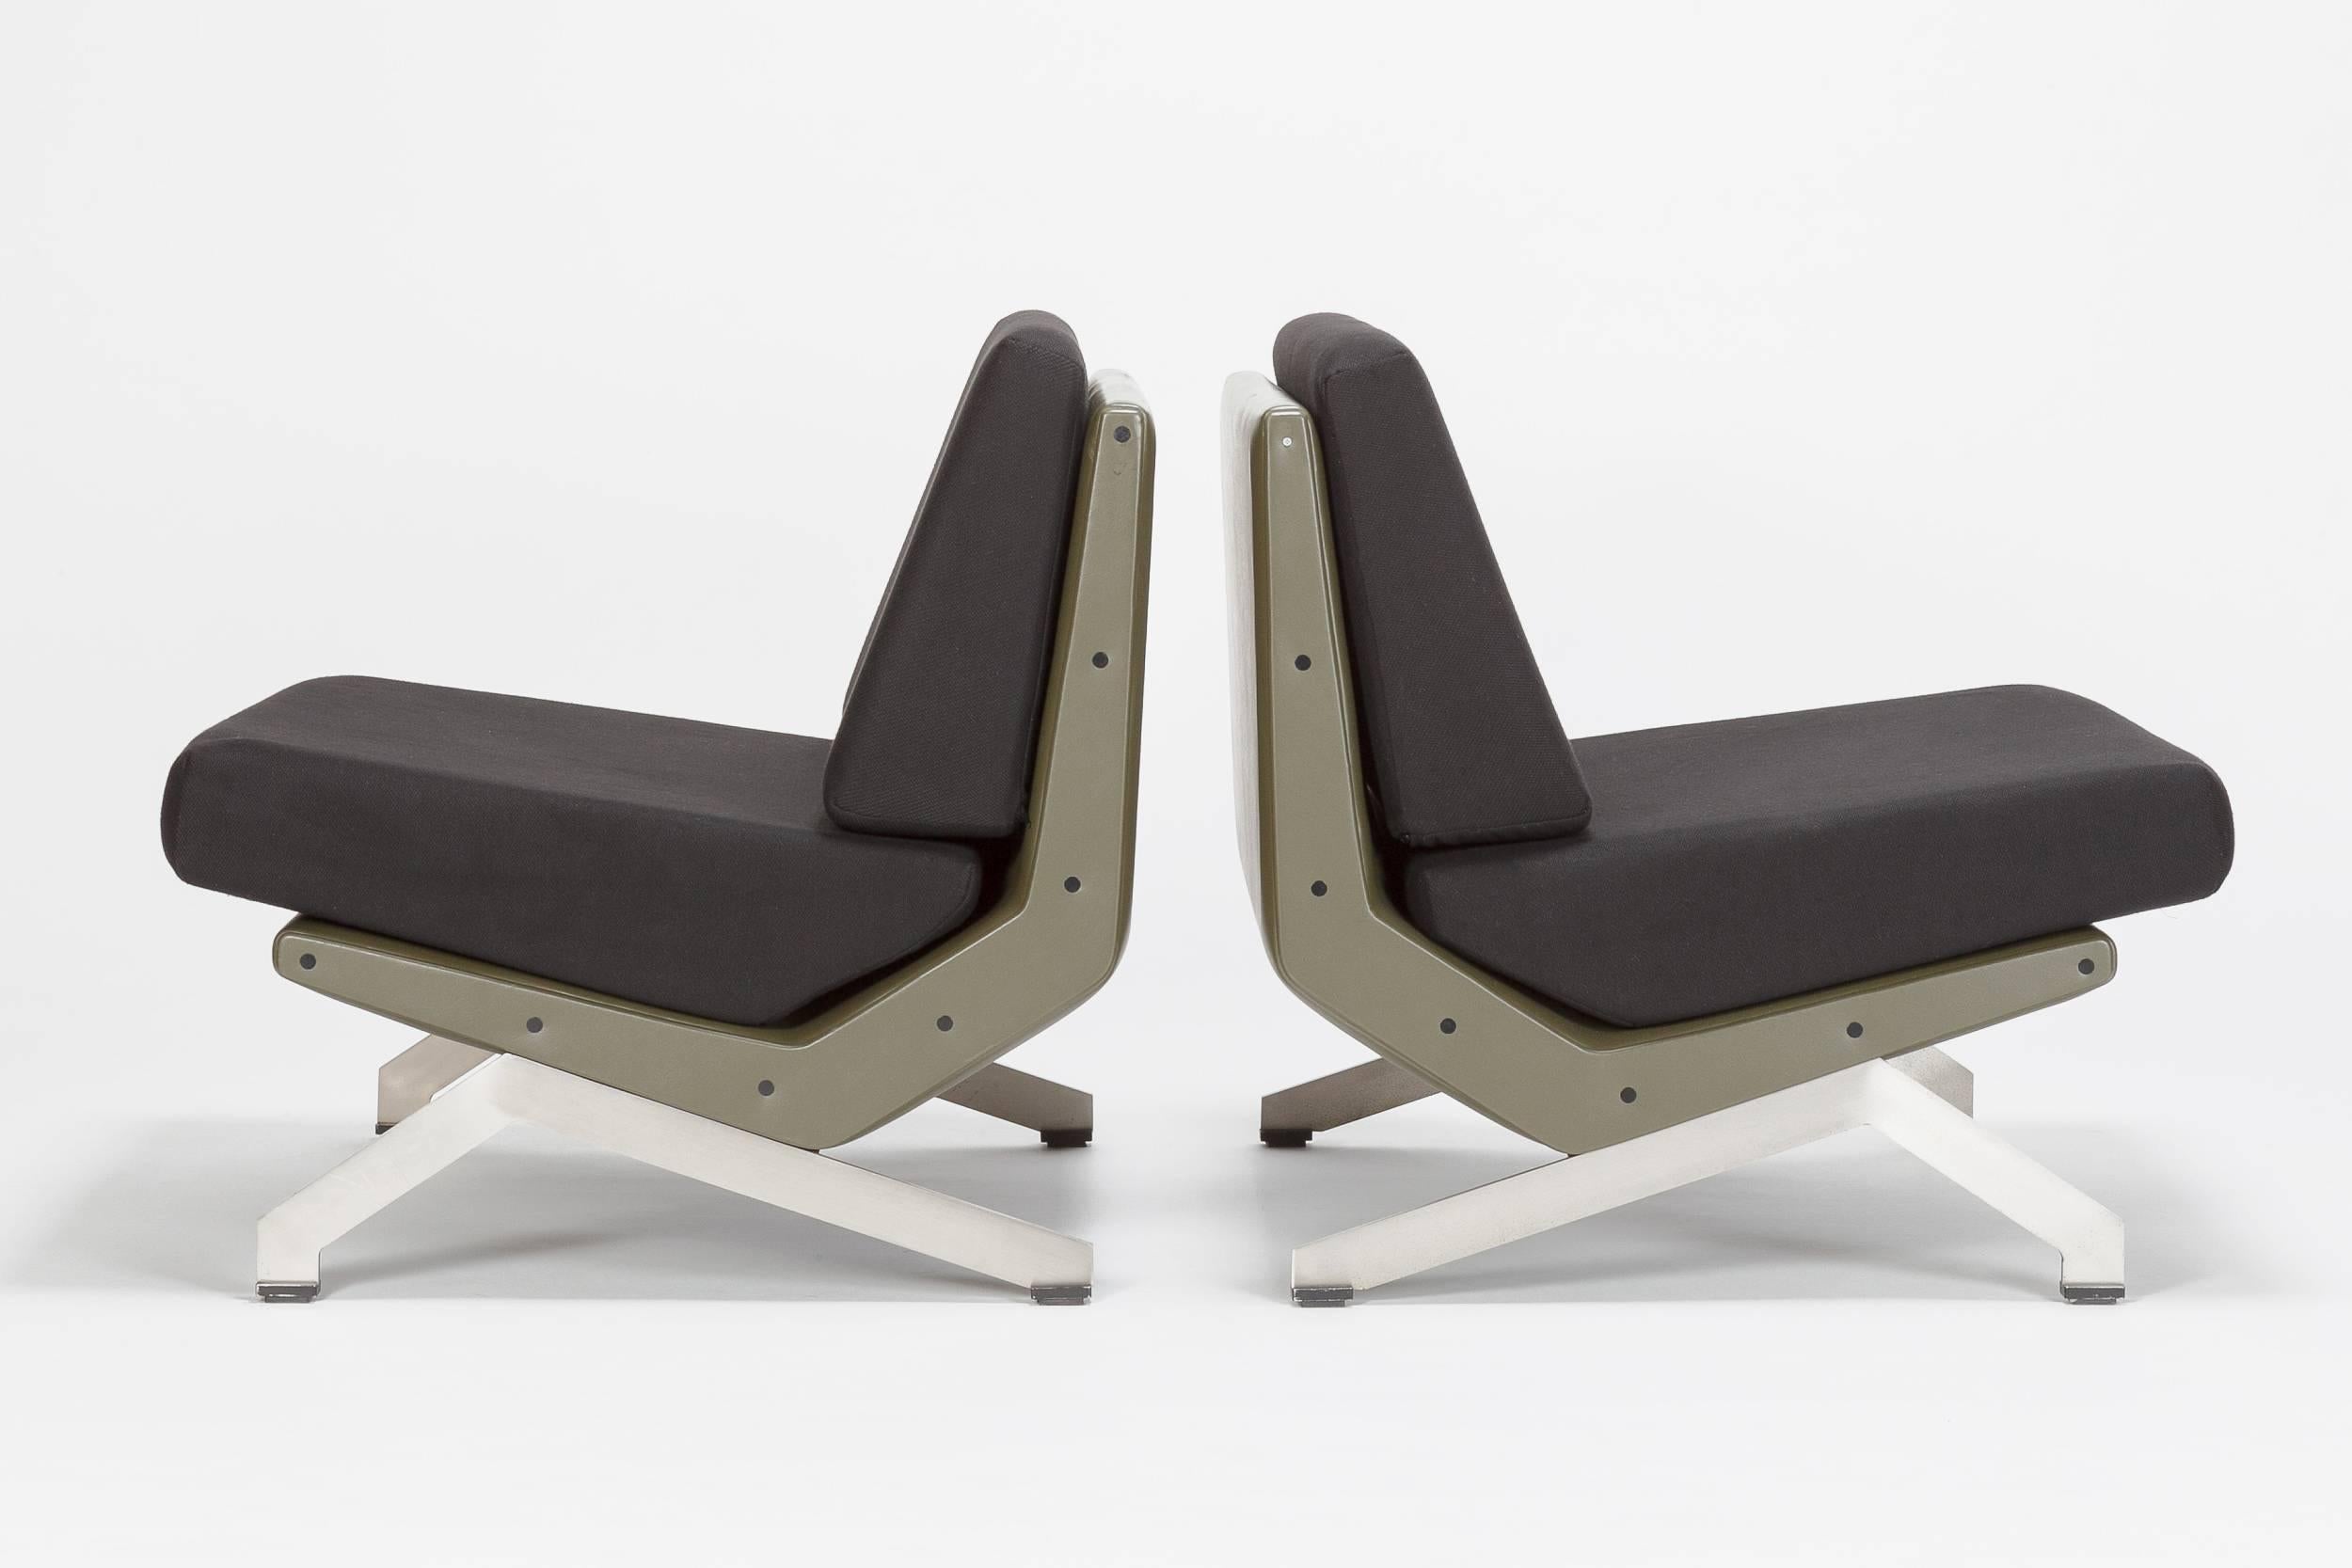 A stunning and rarely seen pair of Gianni Moscatelli lounge chairs, manufactured by Formanova in Italy in the late 1960s. Brushed flat steel base, frame is made of plastic covered with skai leather, new seat cushions covered with a fine cotton